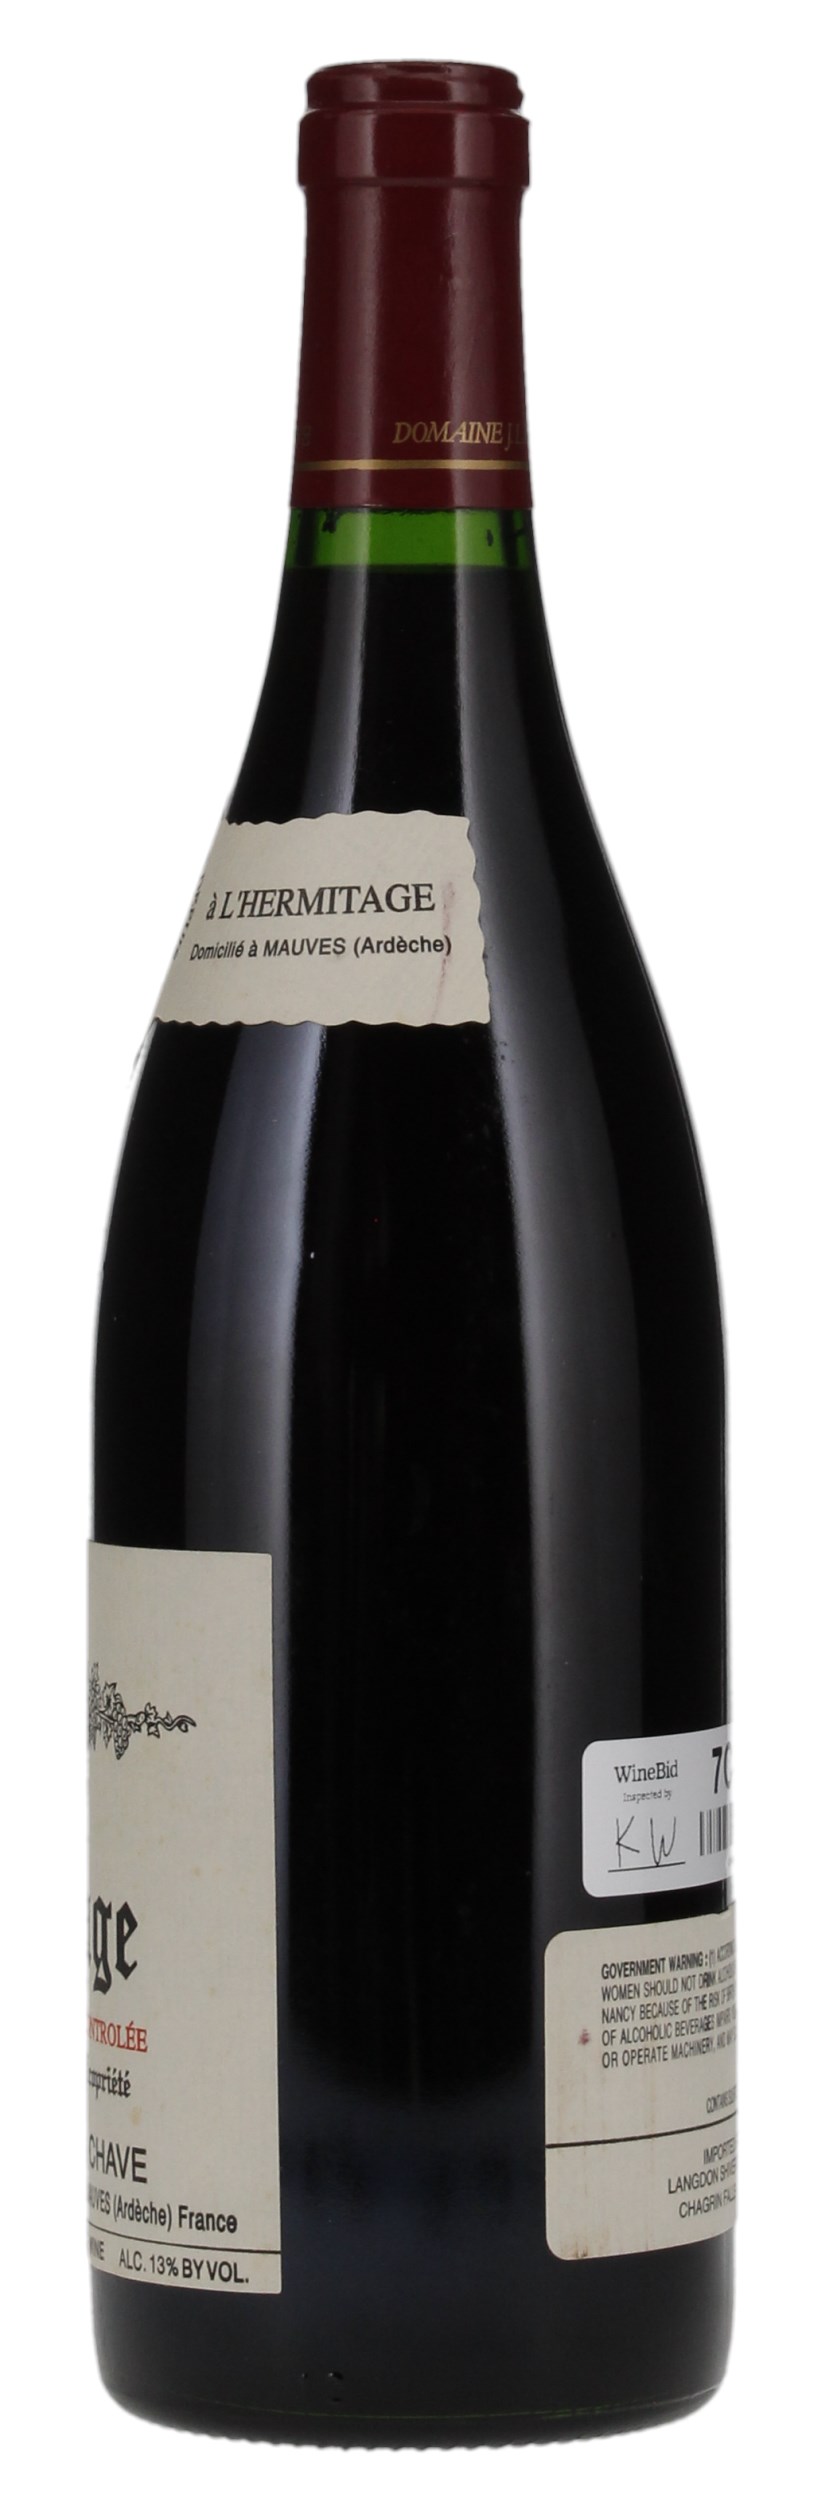 1991 Jean-Louis Chave Hermitage, 750ml